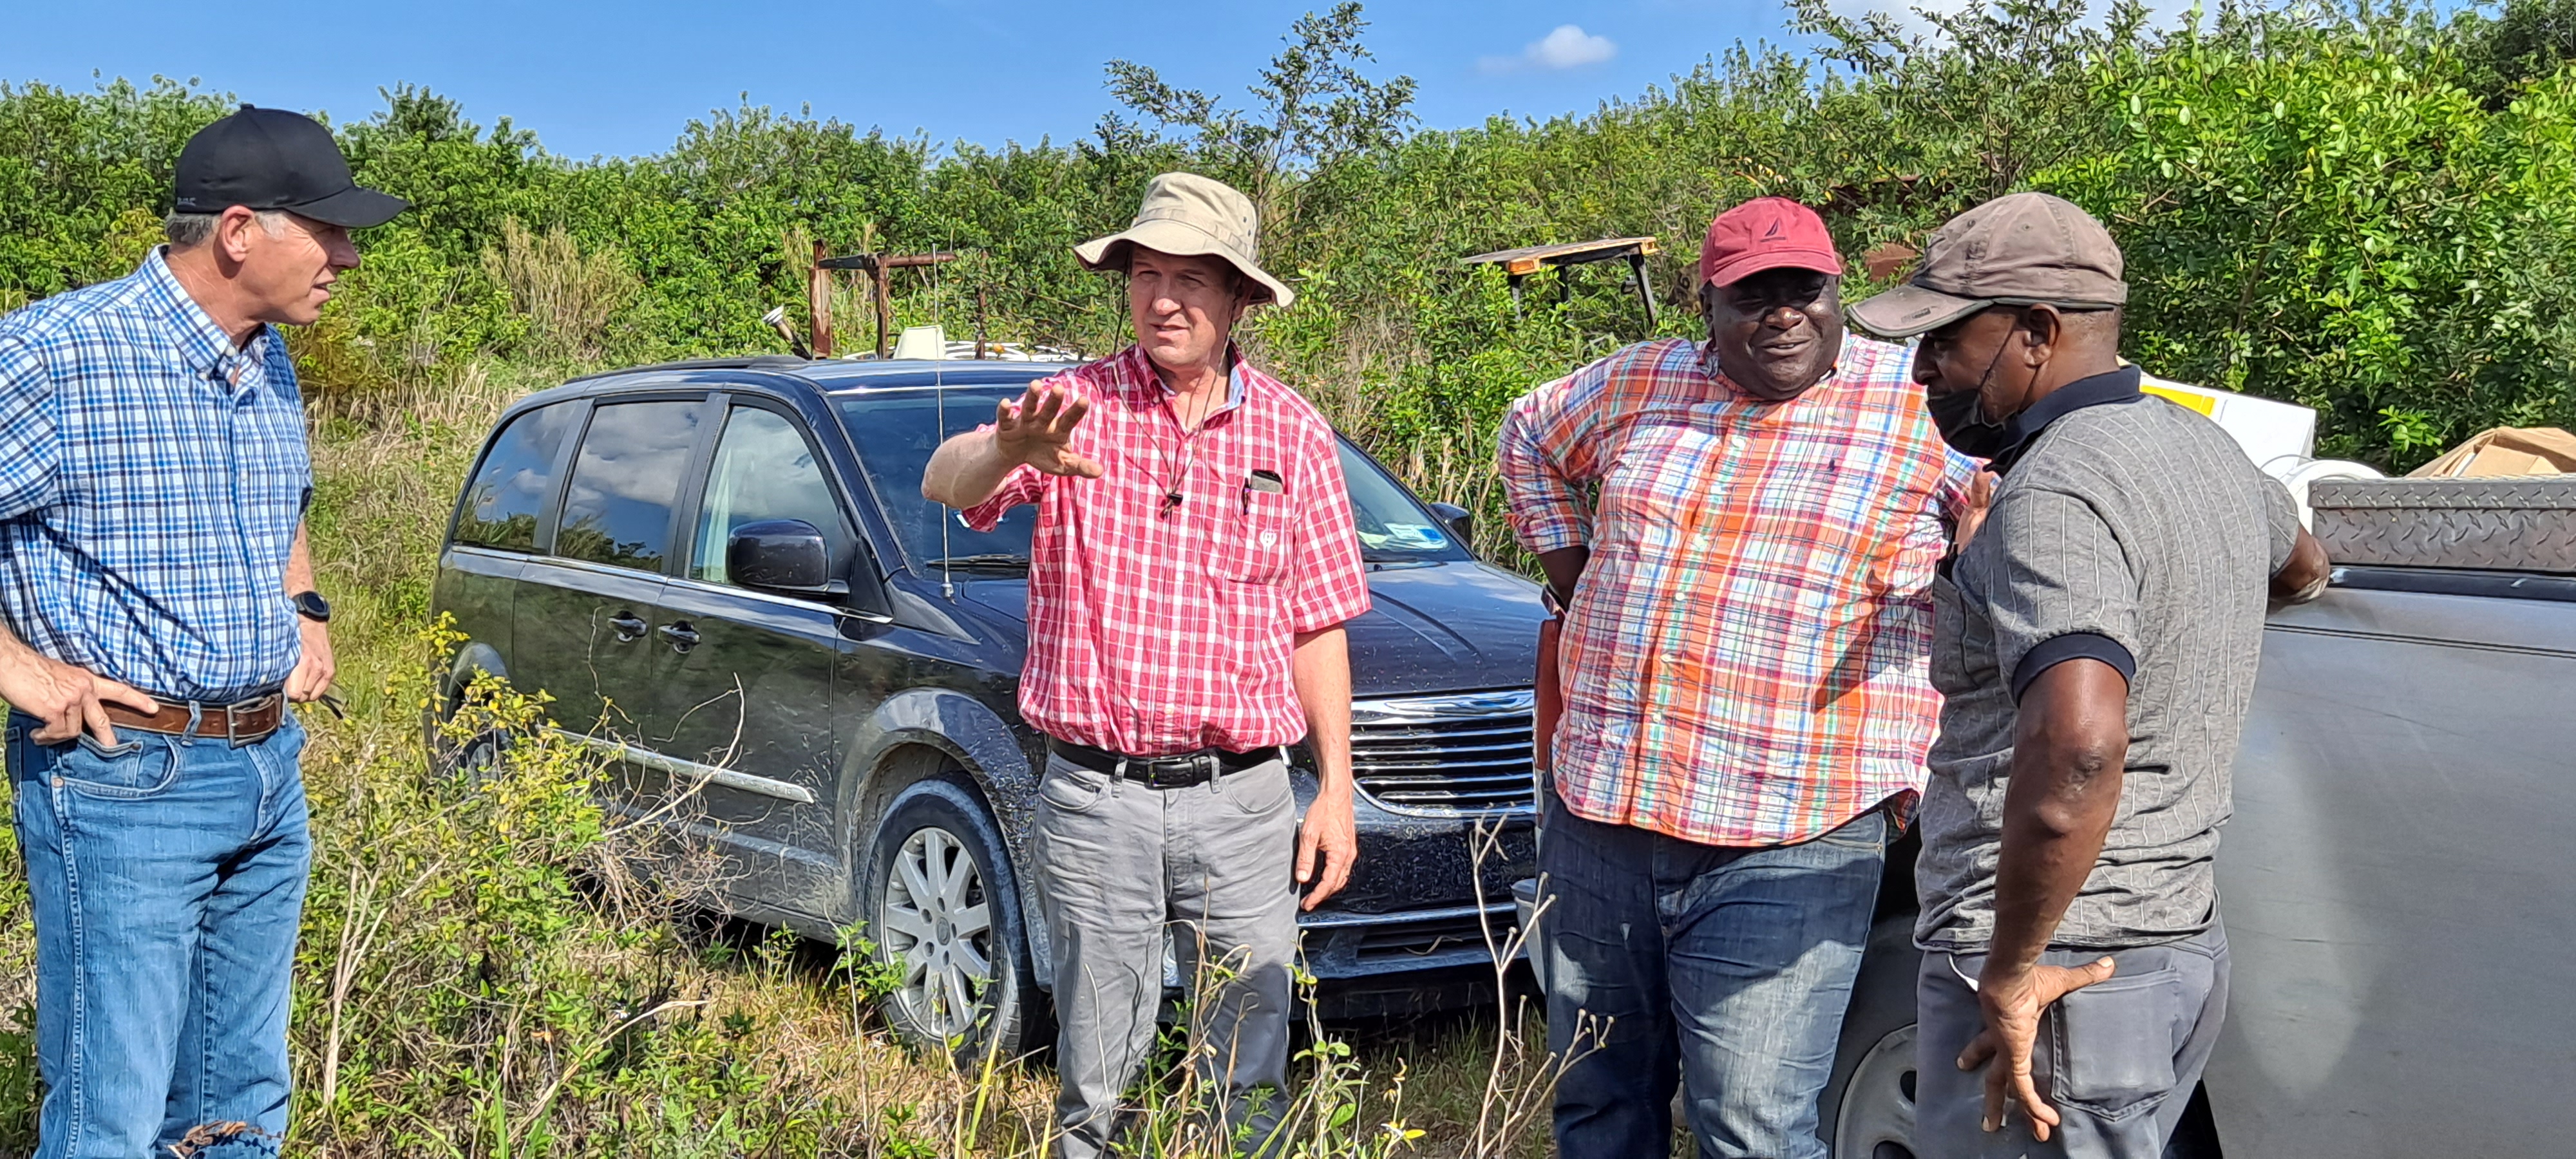 Several MU Extension specialists traveled to the Bahamas with Convoy of Hope to provide agricultural education. Photo courtesy of Matthew Herring.